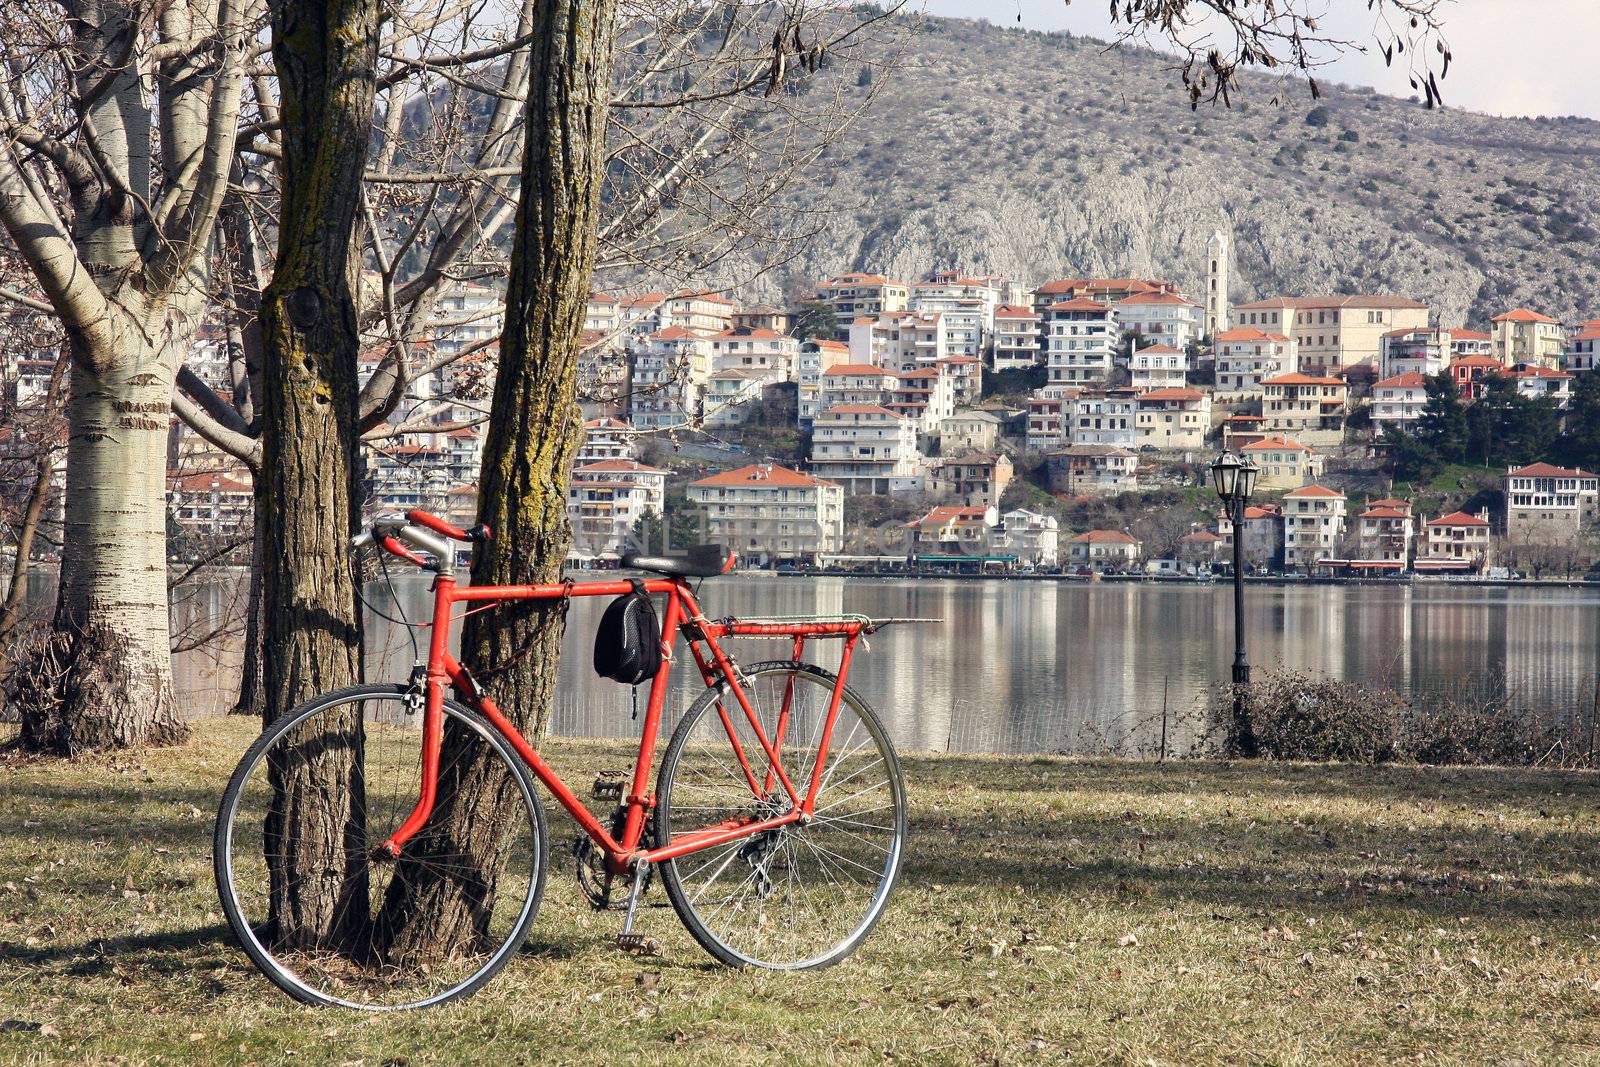 The bicycle and the view of Kastoria with the lake